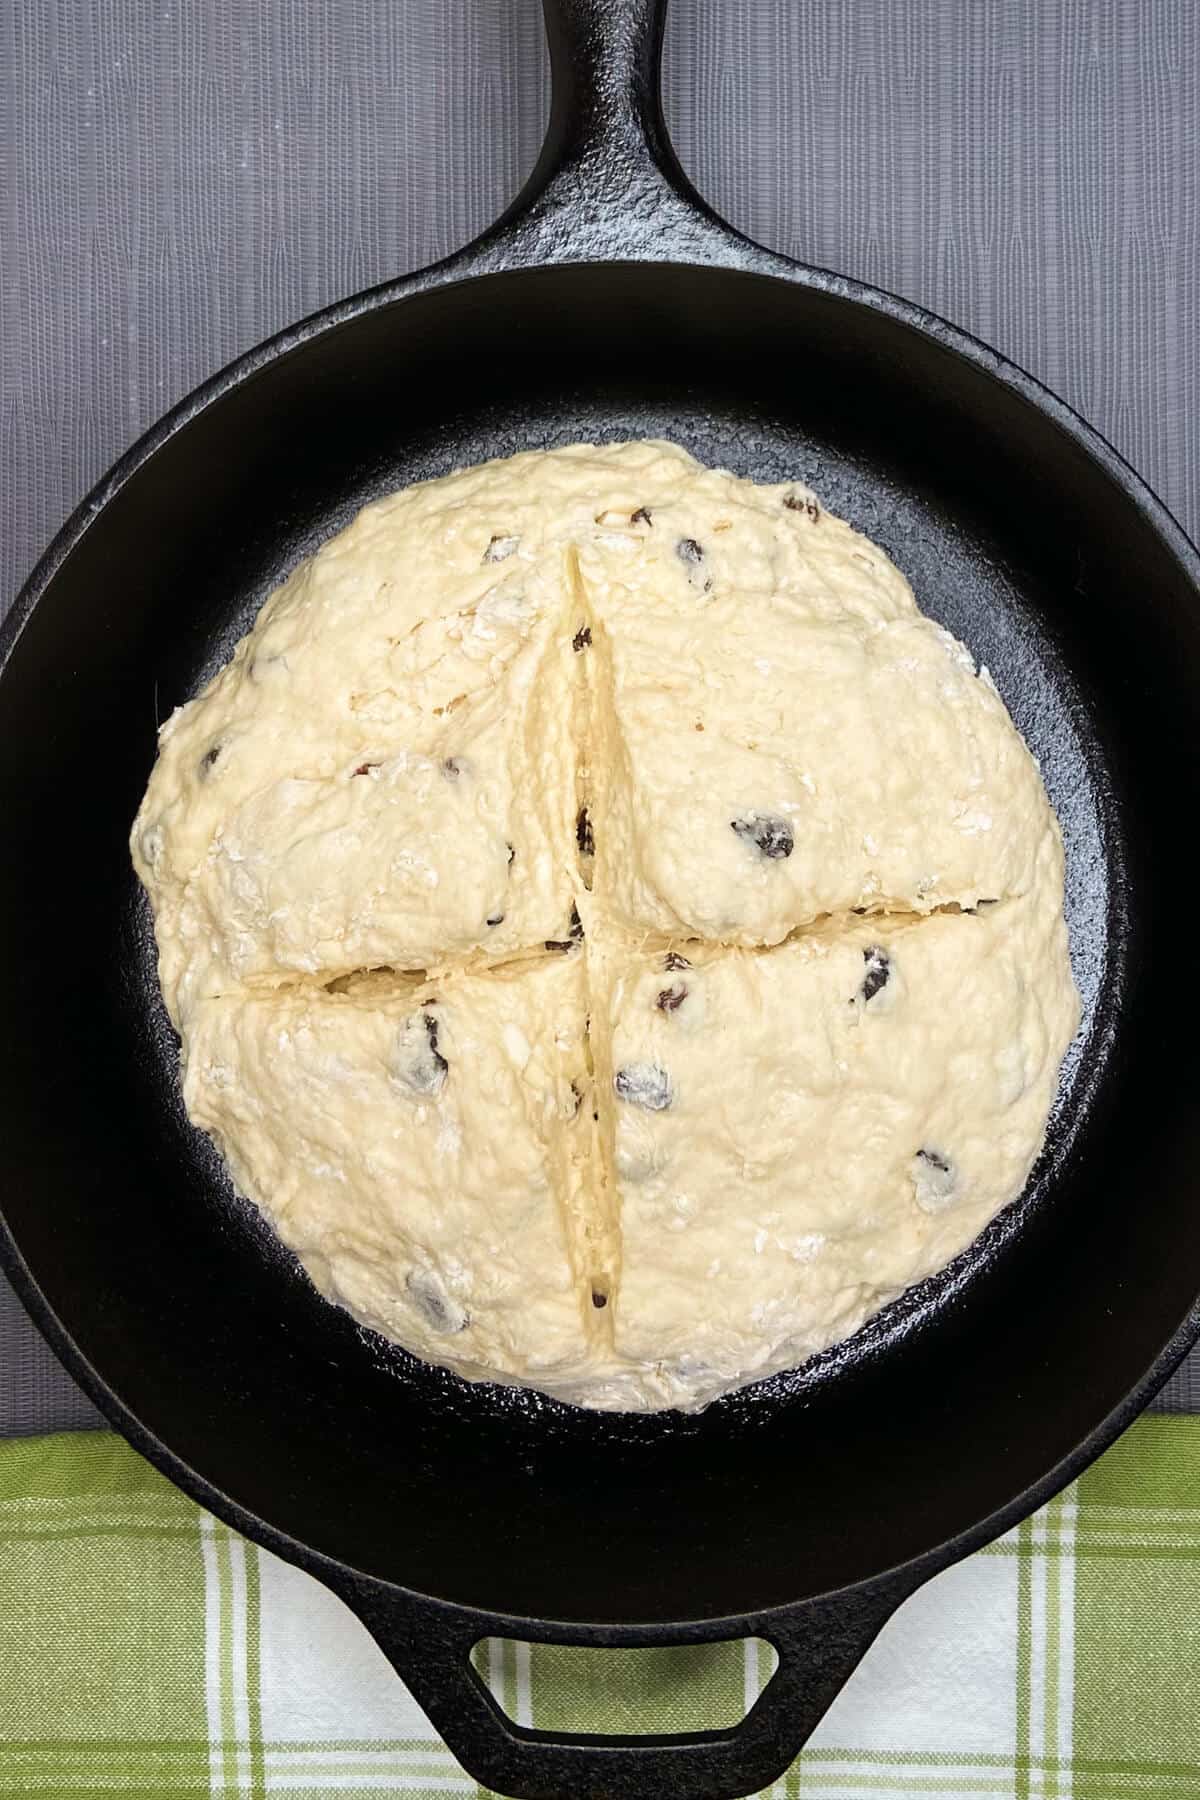 Dough in the pan, ready to be baked.